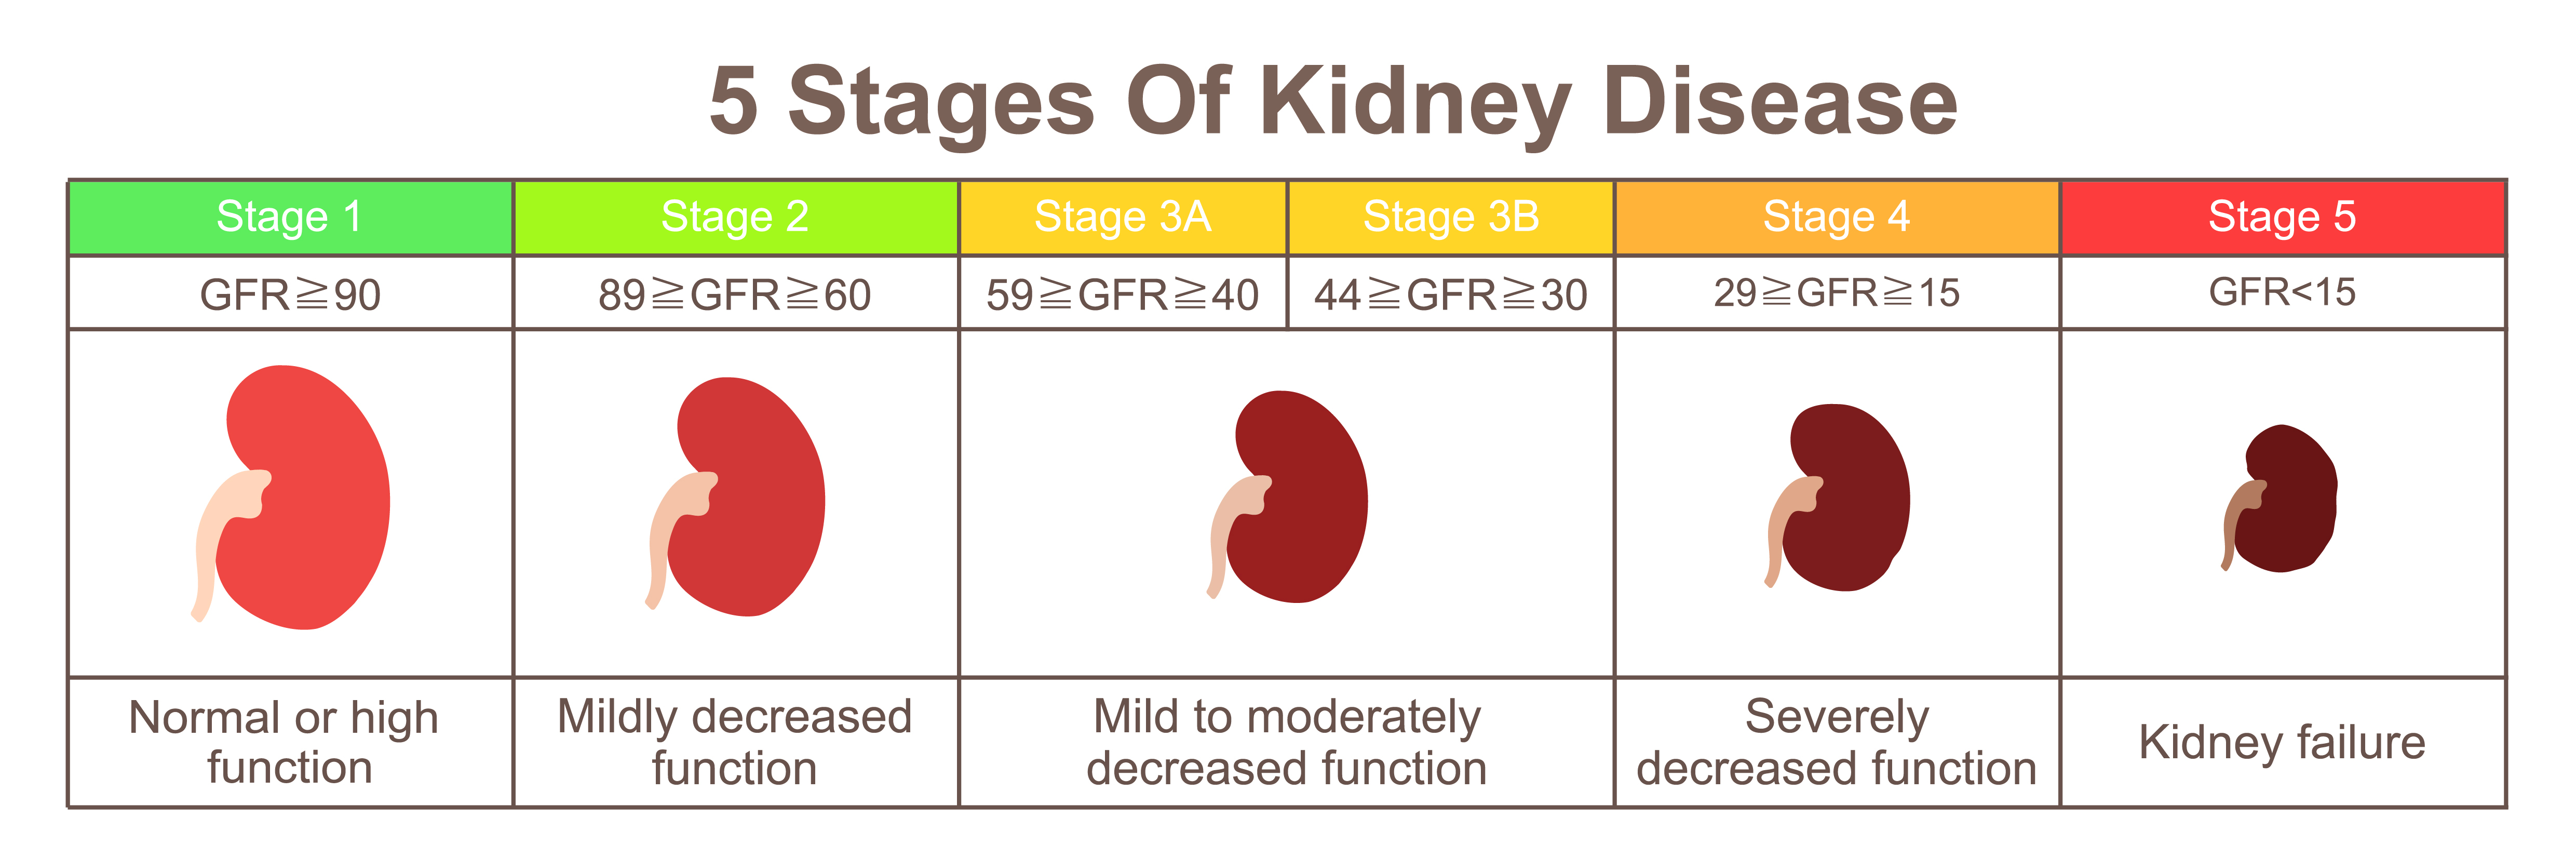 5 stages of kidney failure